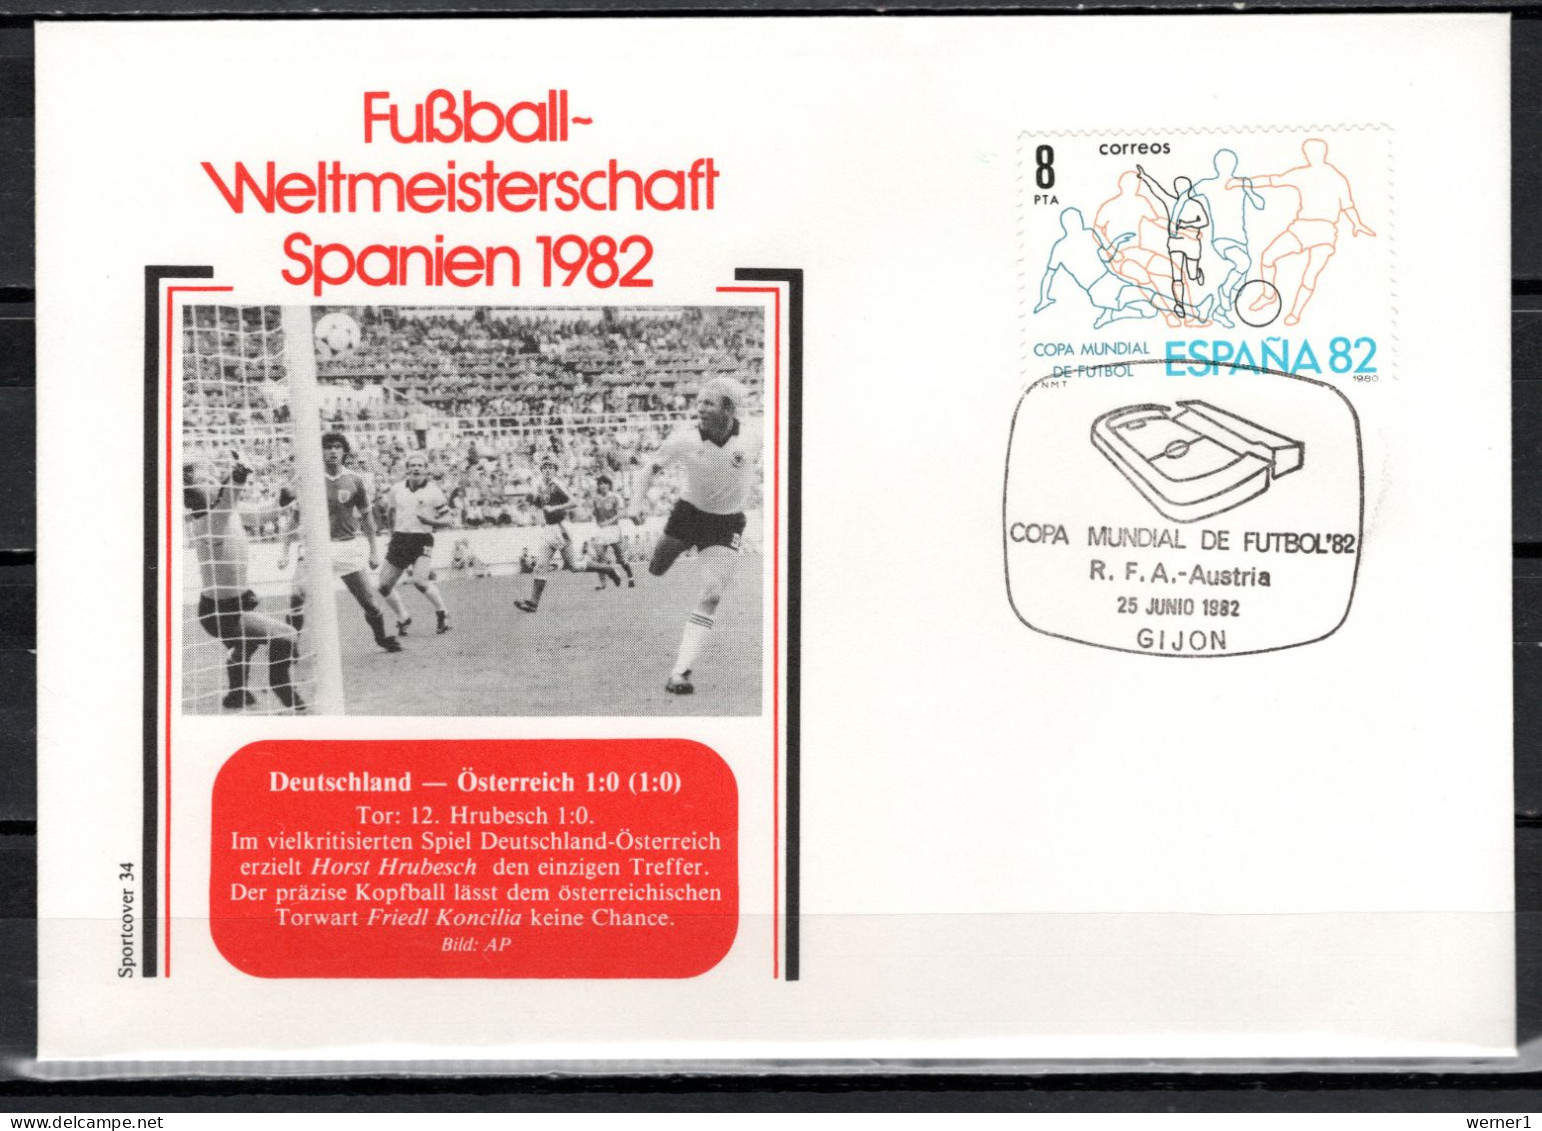 Spain 1982 Football Soccer World Cup Commemorative Cover Match Germany - Austria 1:0 - 1982 – Spain